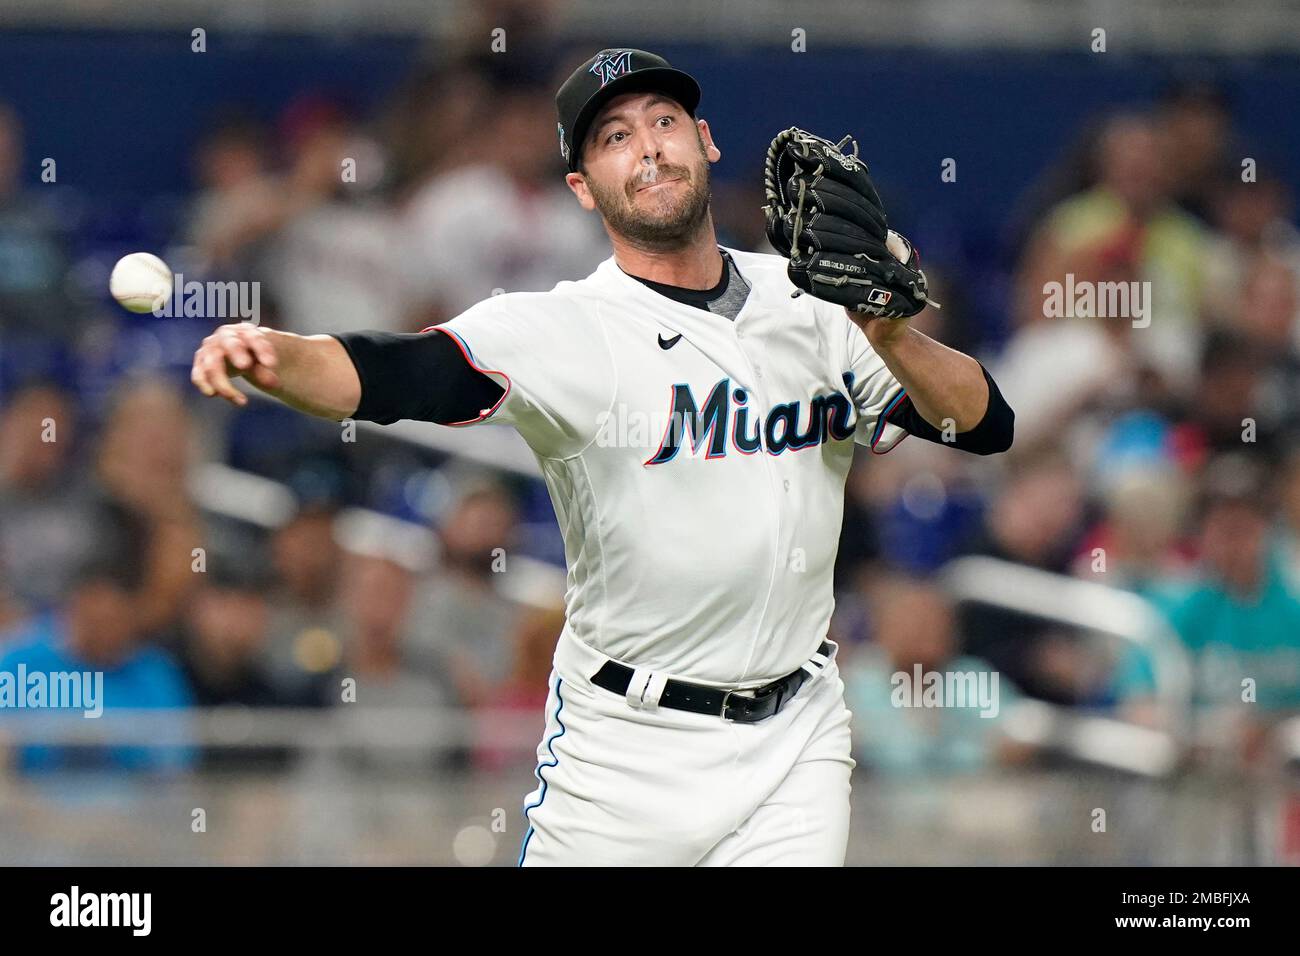 Miami Marlins relief pitcher Dylan Floro throws during a baseball game ...